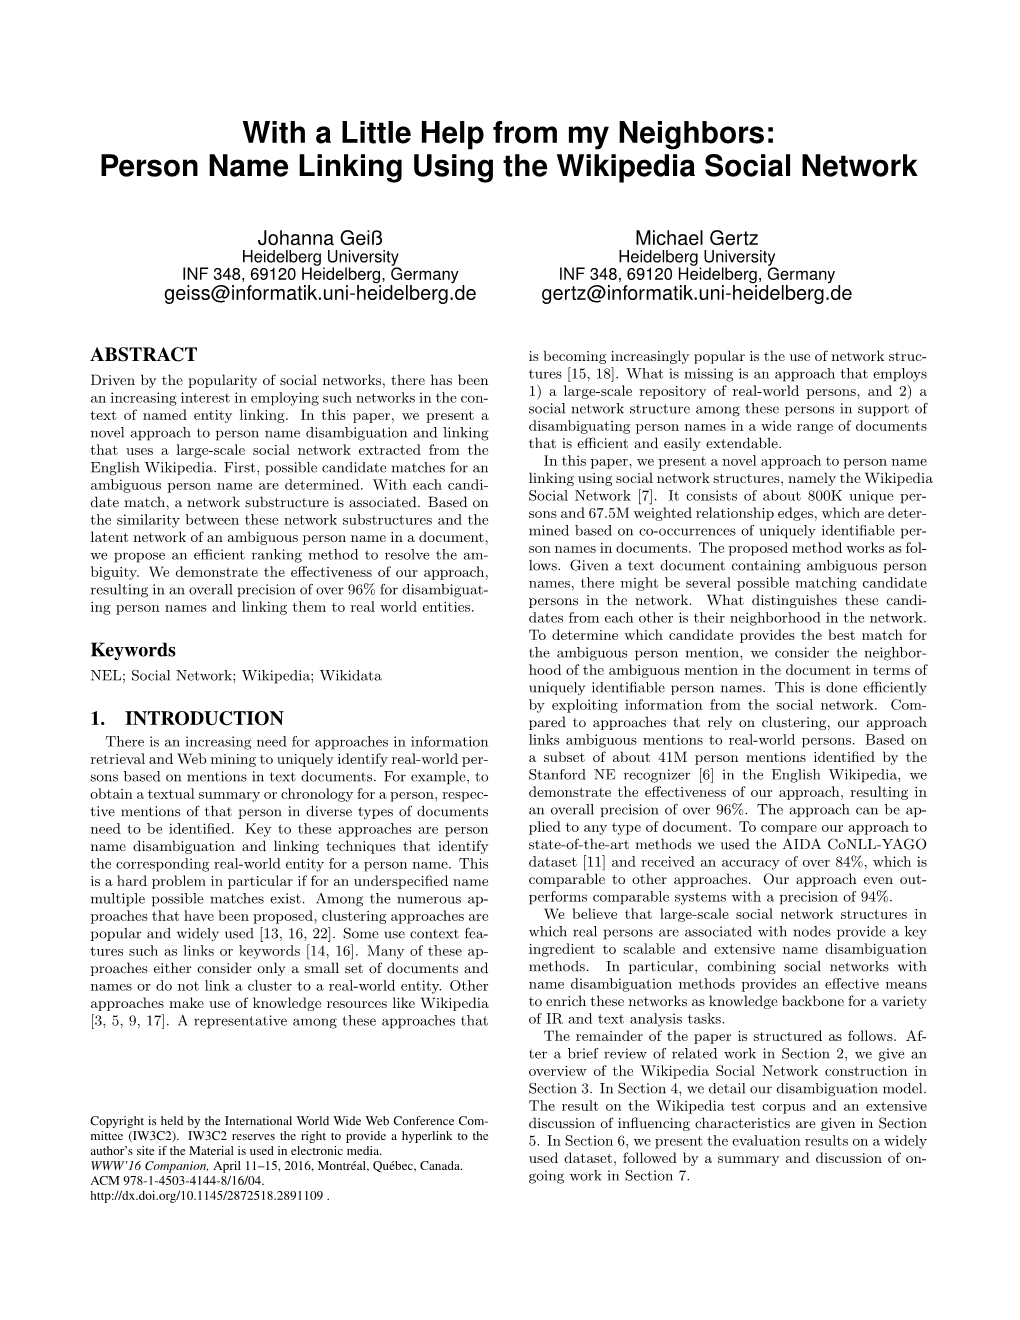 With a Little Help from My Neighbors: Person Name Linking Using the Wikipedia Social Network